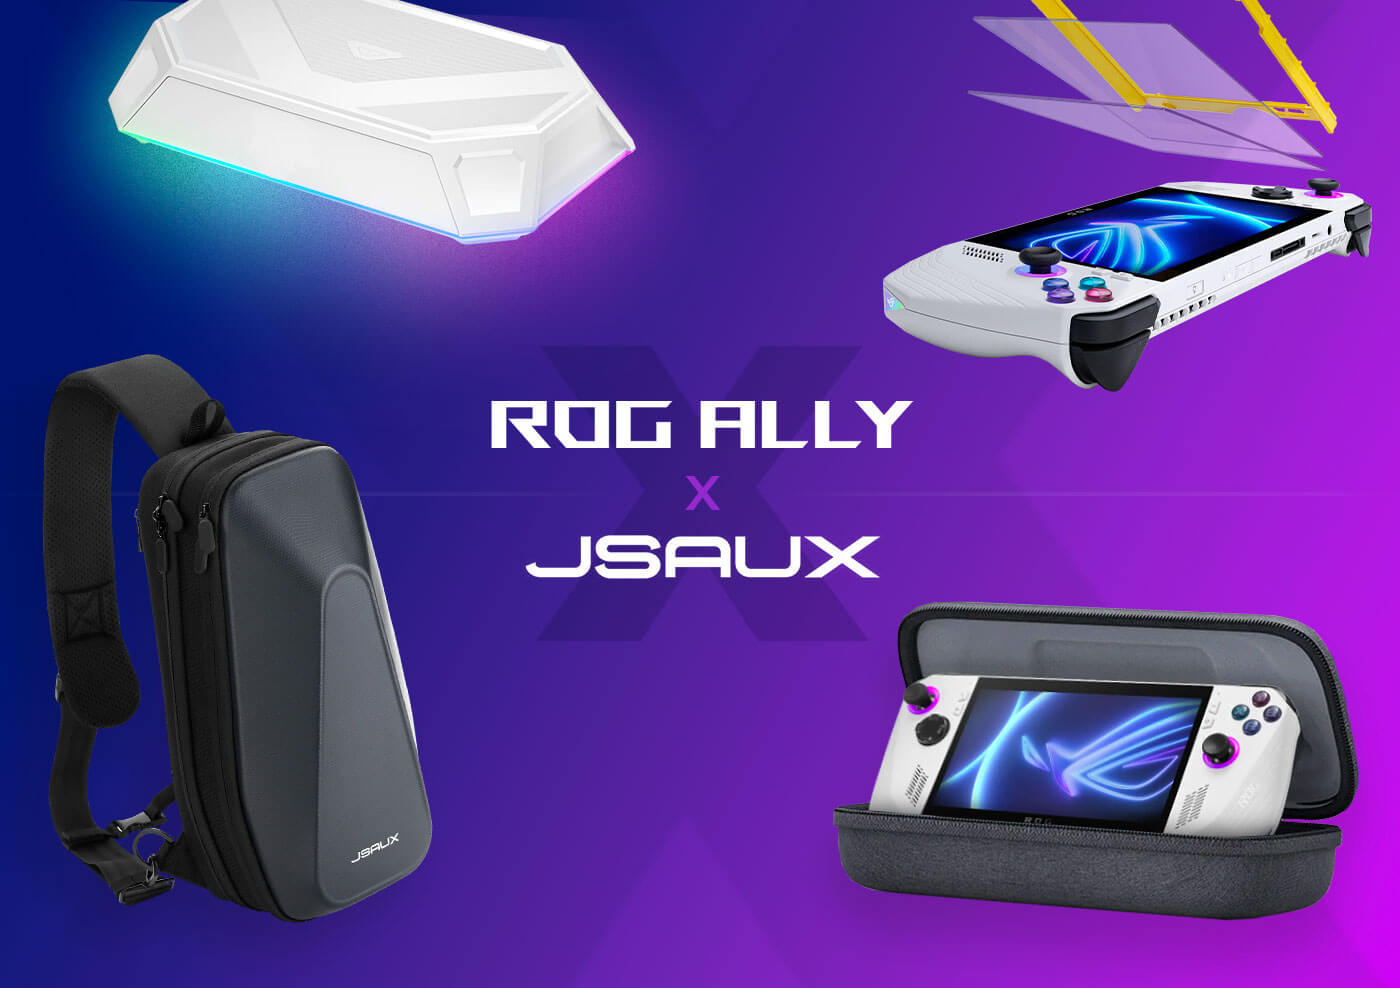 The latest JSAUX ROG Ally accessories are an awesome case and a transparent  backplate